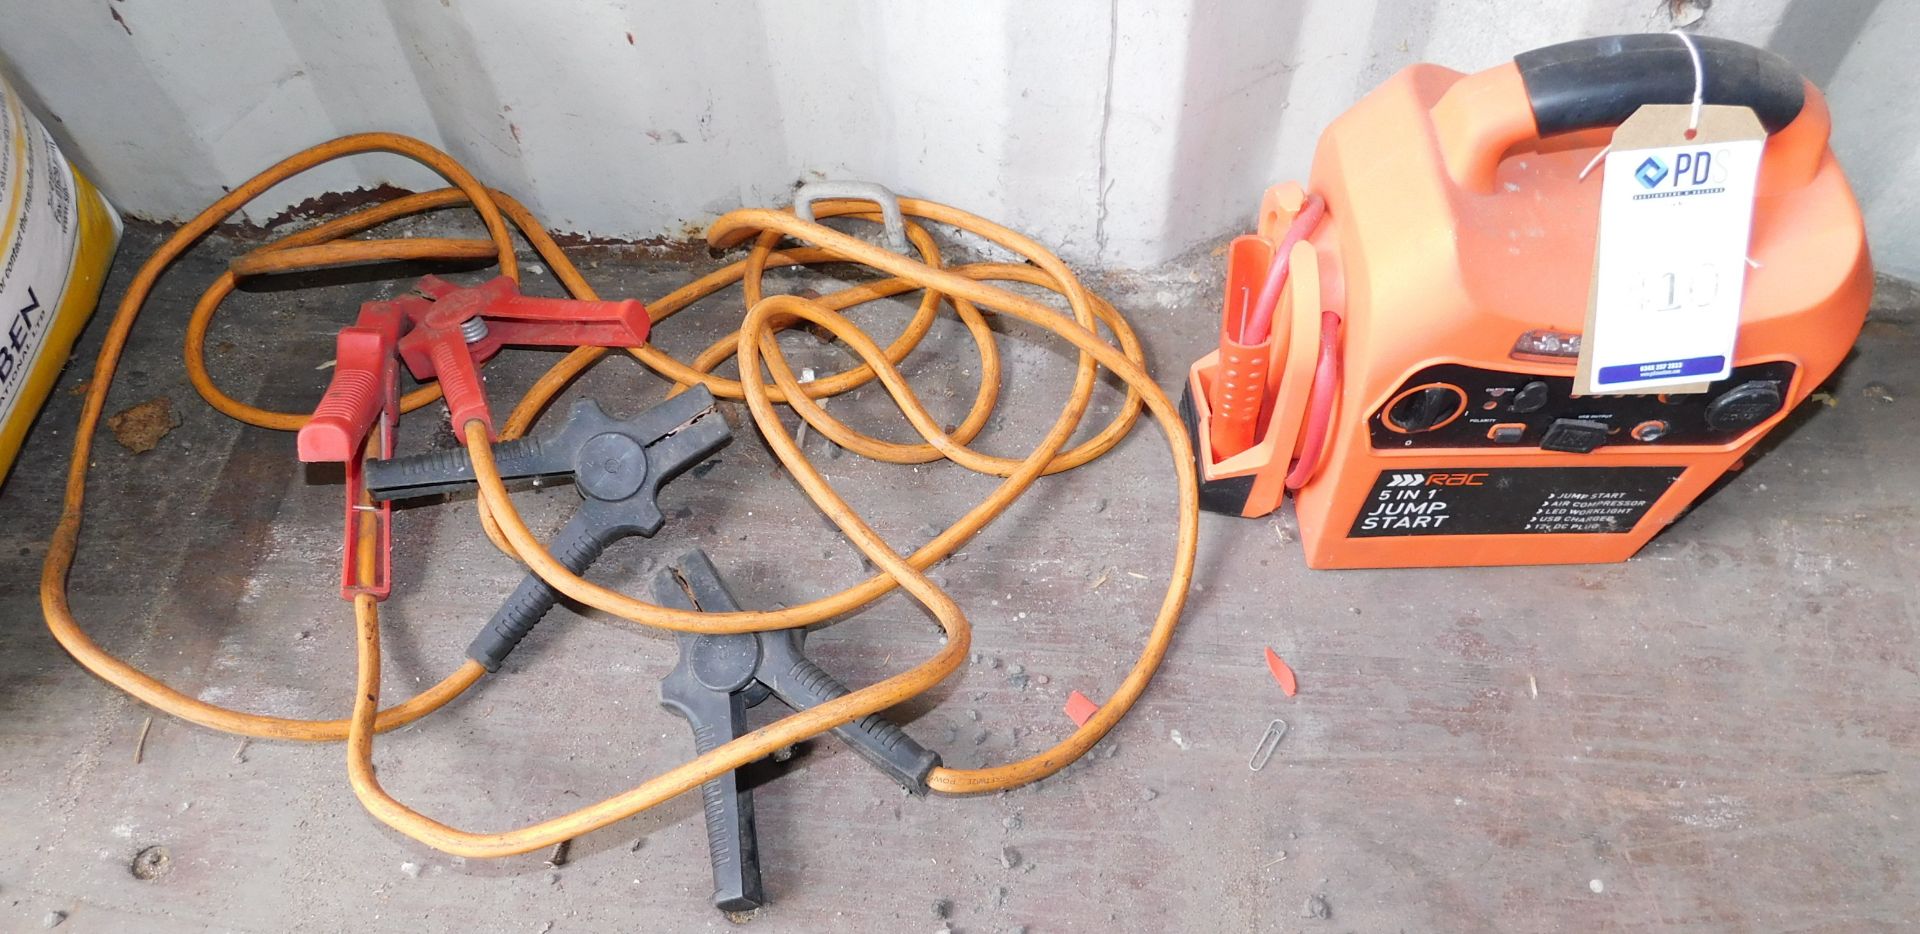 RAC 5-in-1 Jump Start with Jump Leads (Located Manchester. Please Refer to General Notes)